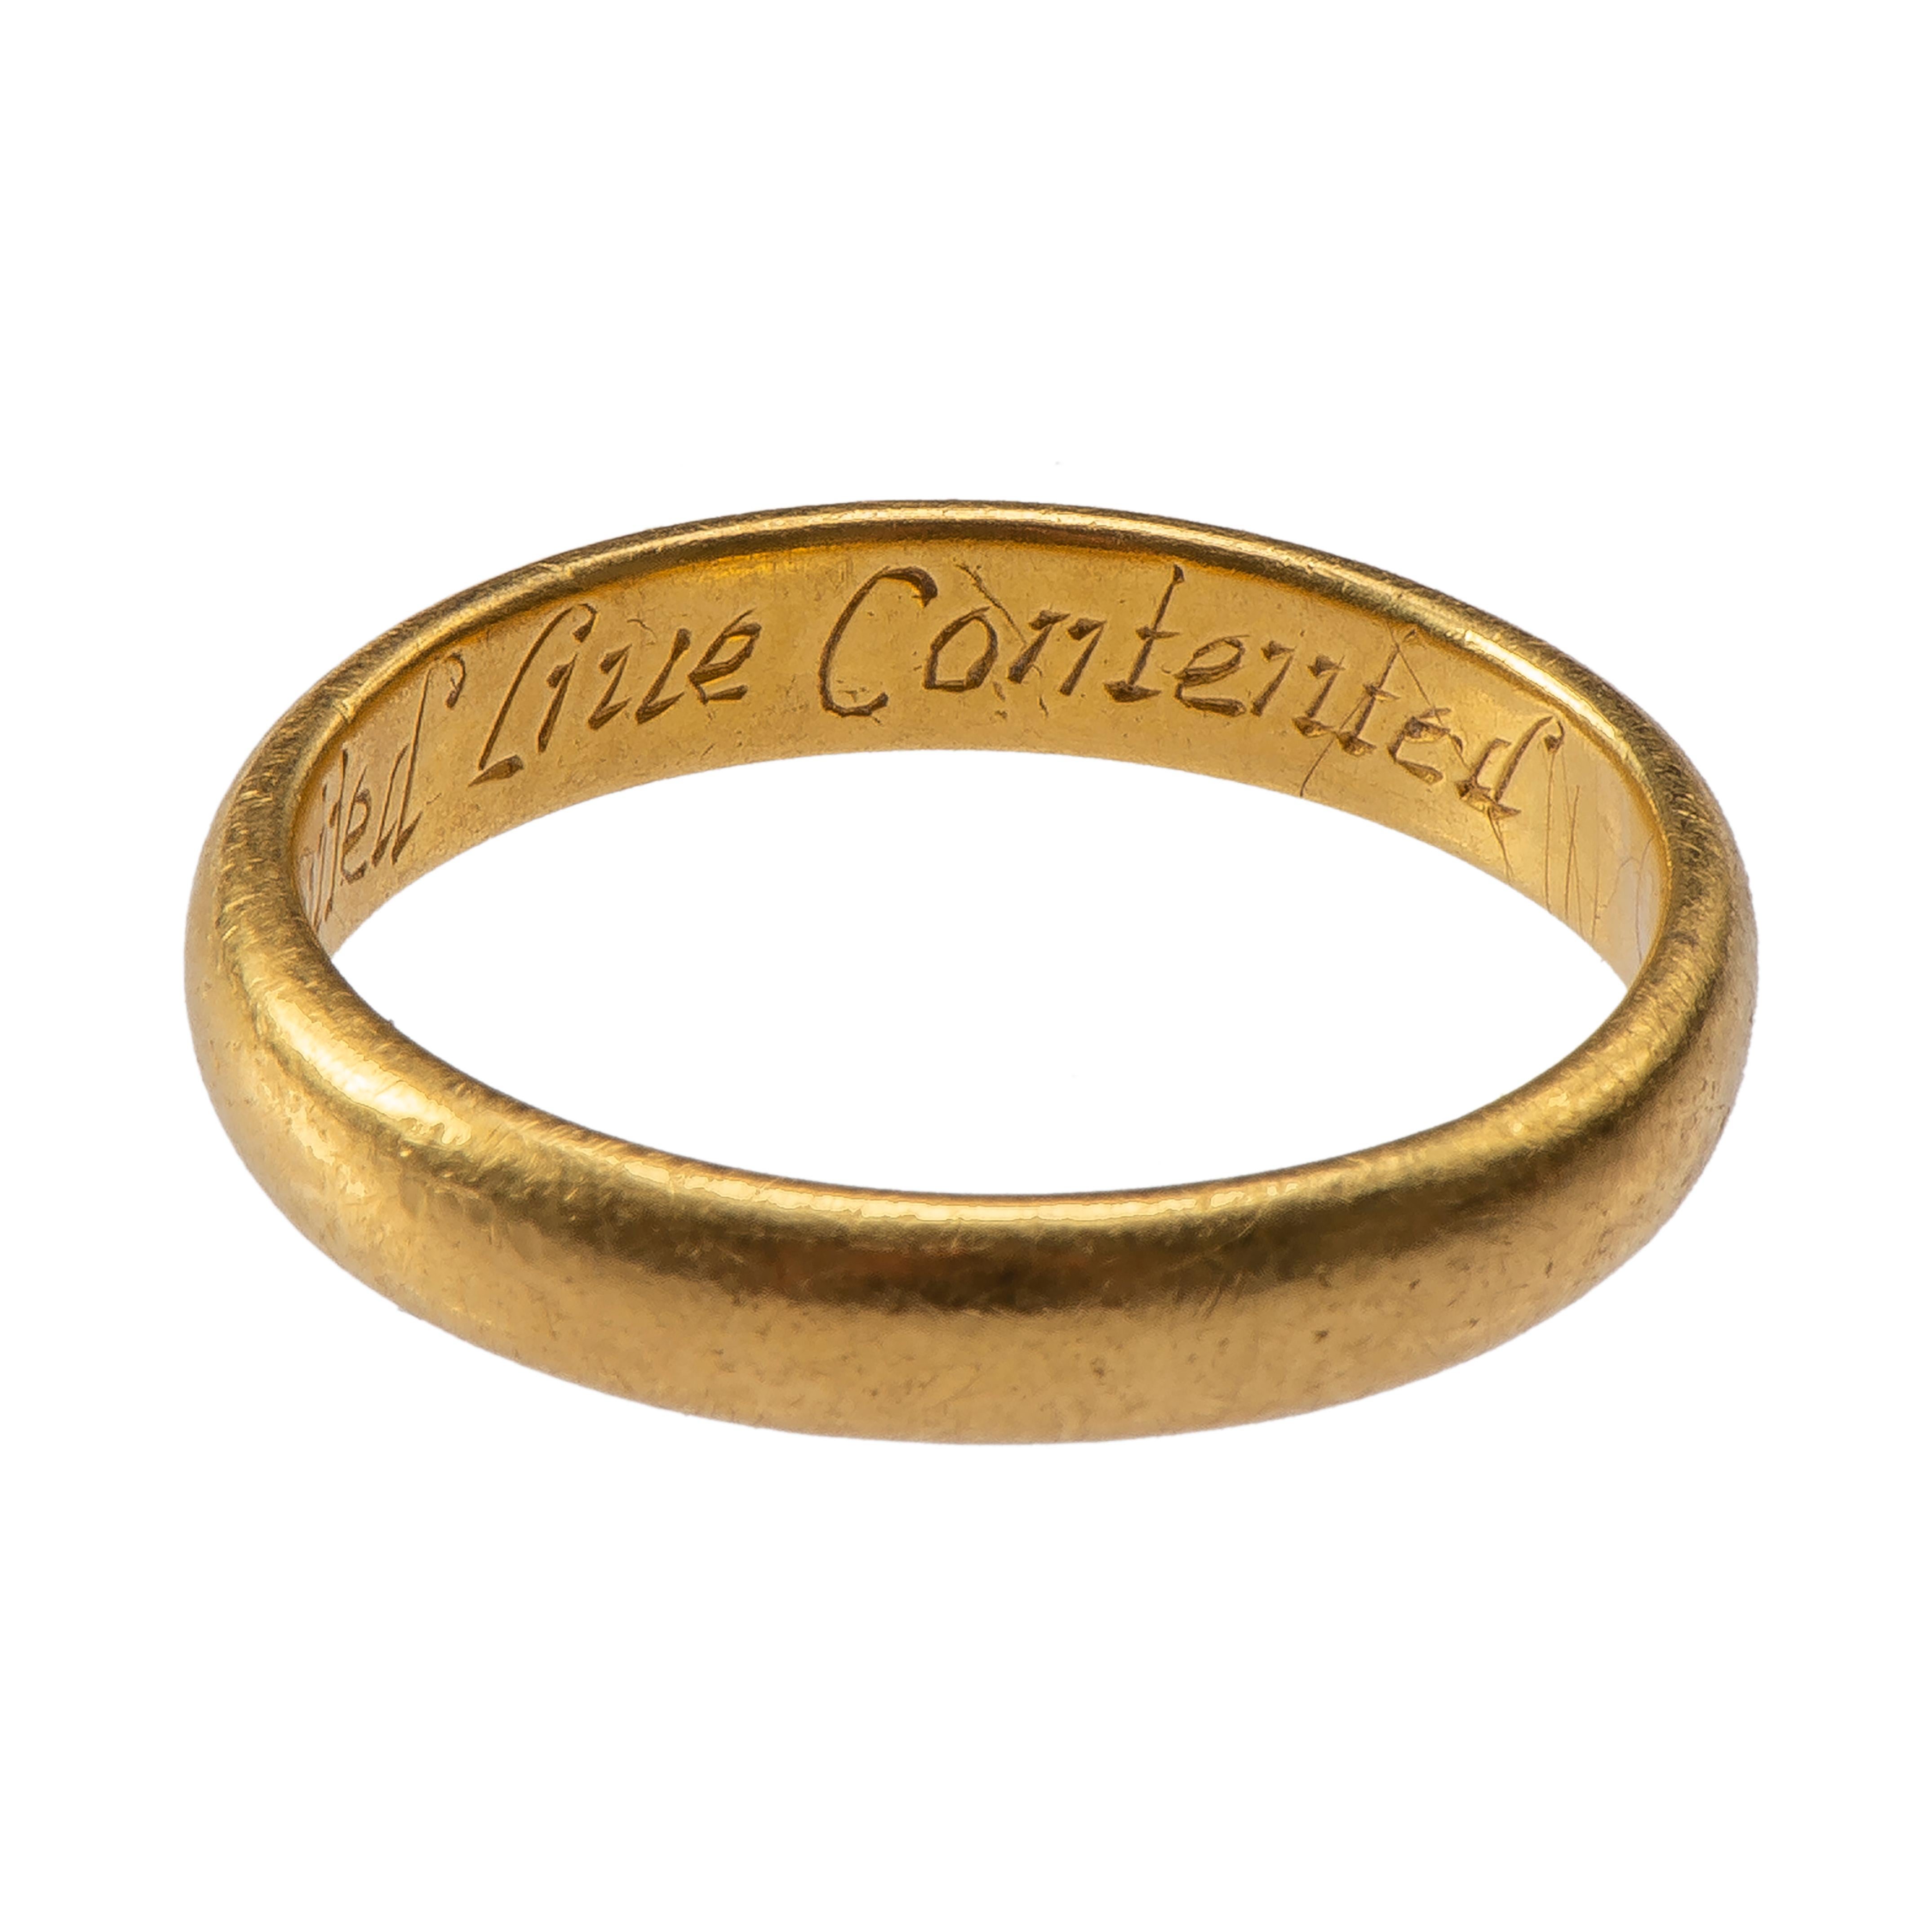 Posy ring “Hearts United Live Contented” 
England, 17th century 
Gold 
Weight 6.9 gr.: circumference 63.46 mm.: US size 10 1/2; UK size U ½ 

A plain gold band with D-section and engraved inscription on the interior in cursive script reads: “Hearts